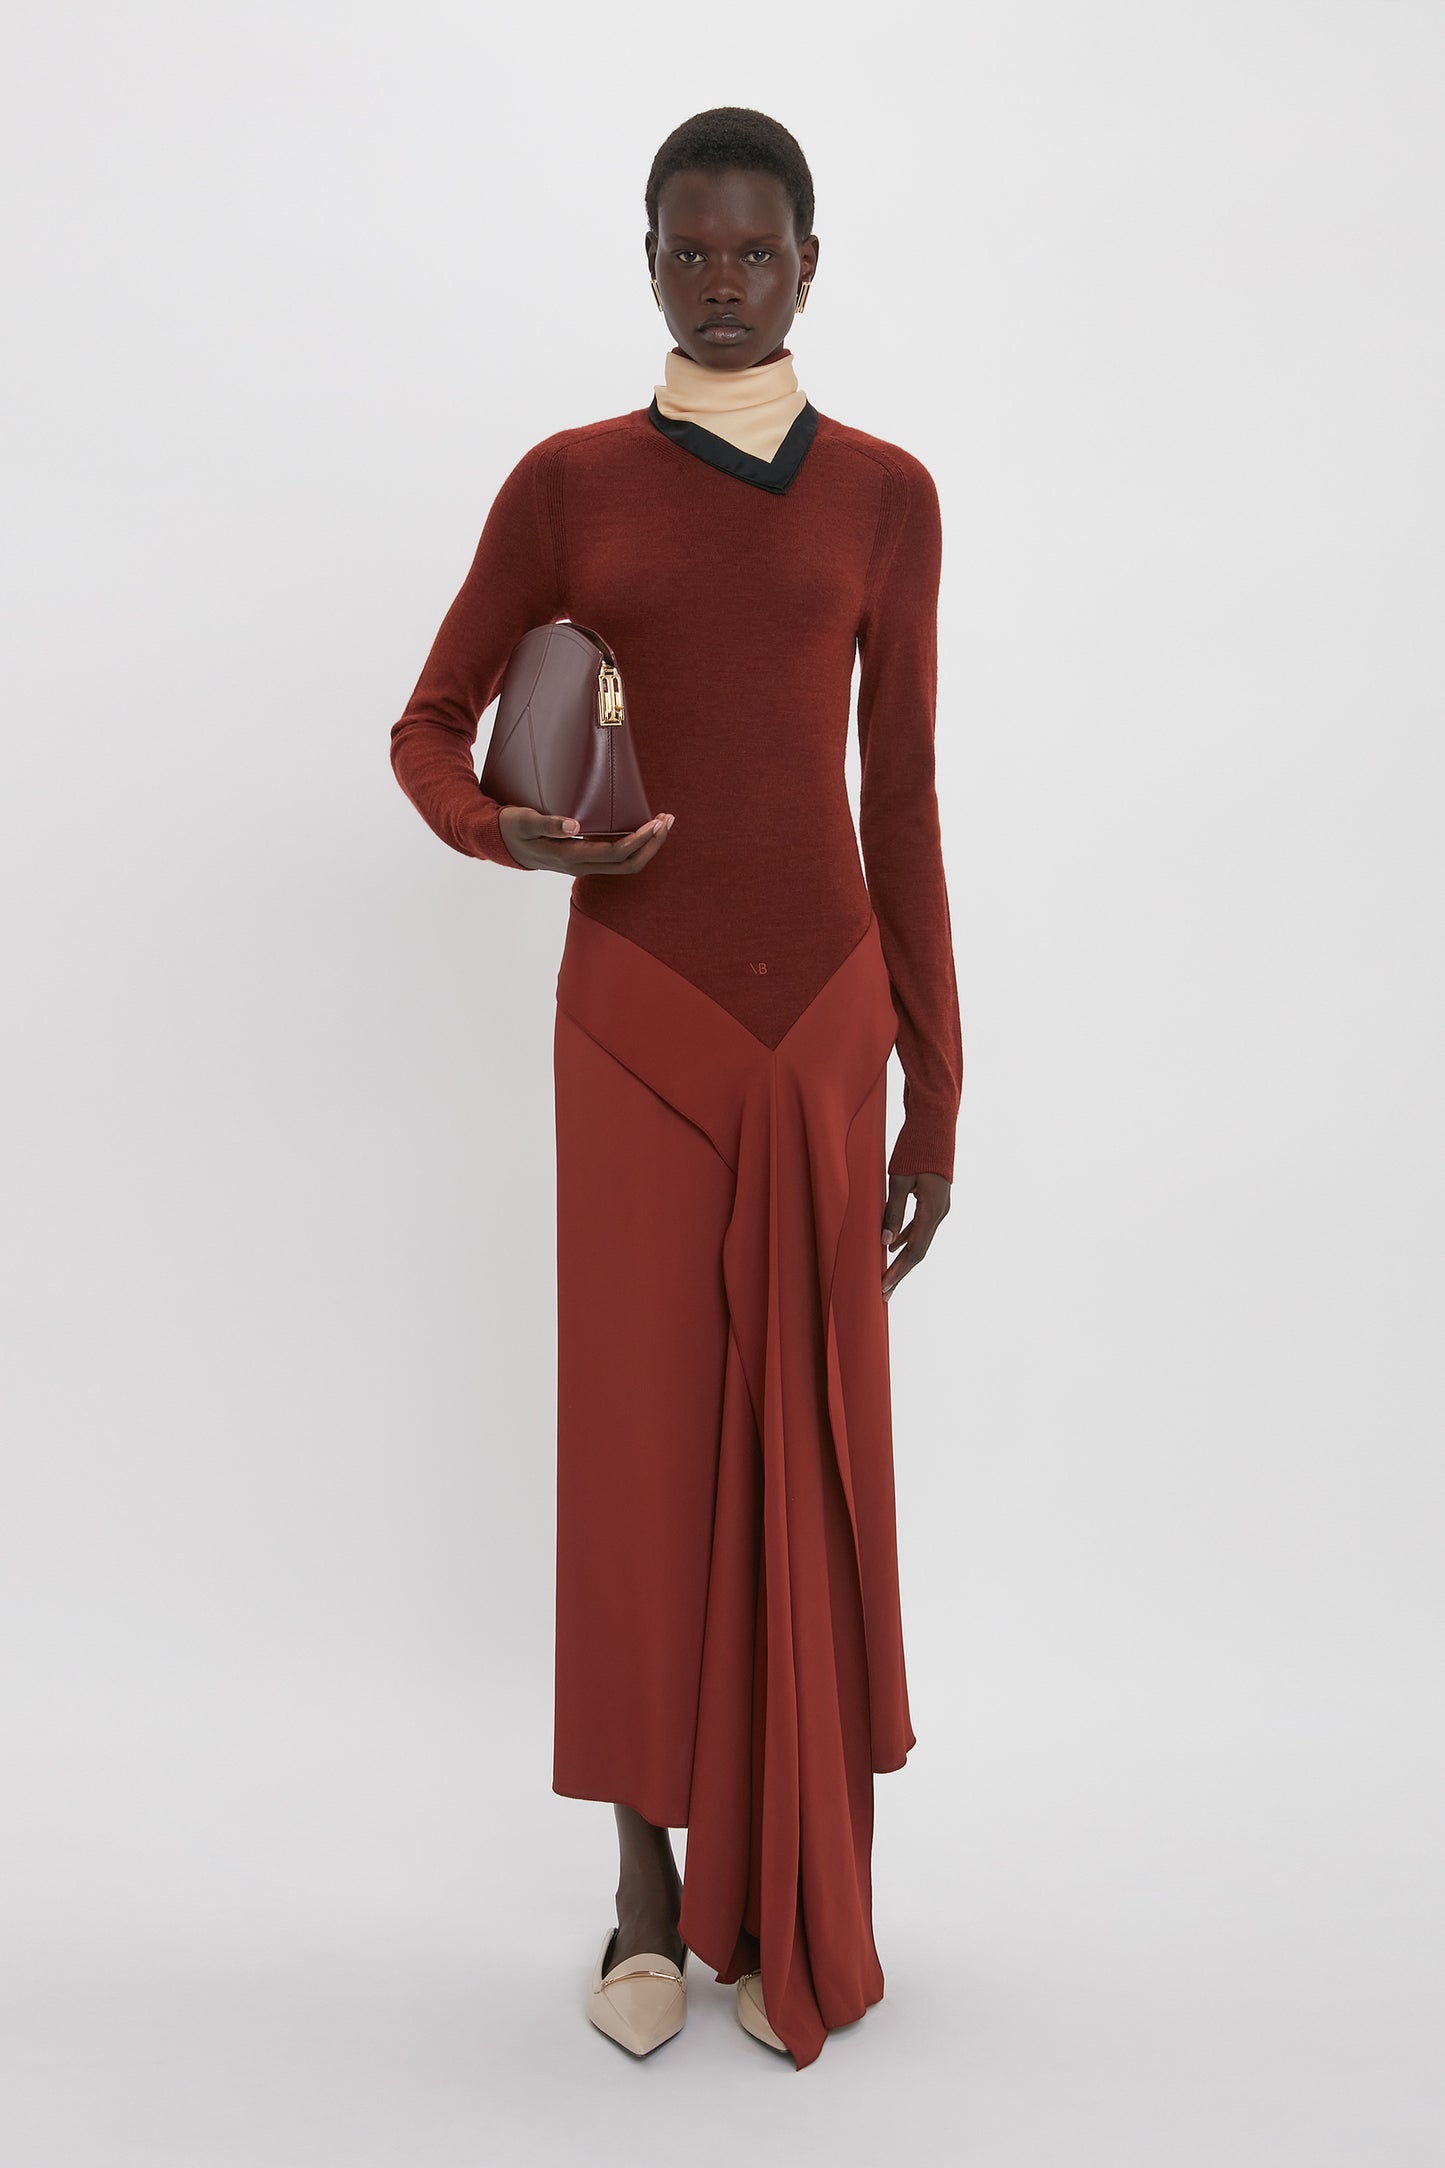 A person stands against a white background wearing the High Neck Tie Detail Dress In Russet by Victoria Beckham, draped in rich red fabric, and holding a burgundy handbag. They also wear beige shoes and a cream-colored neck band.